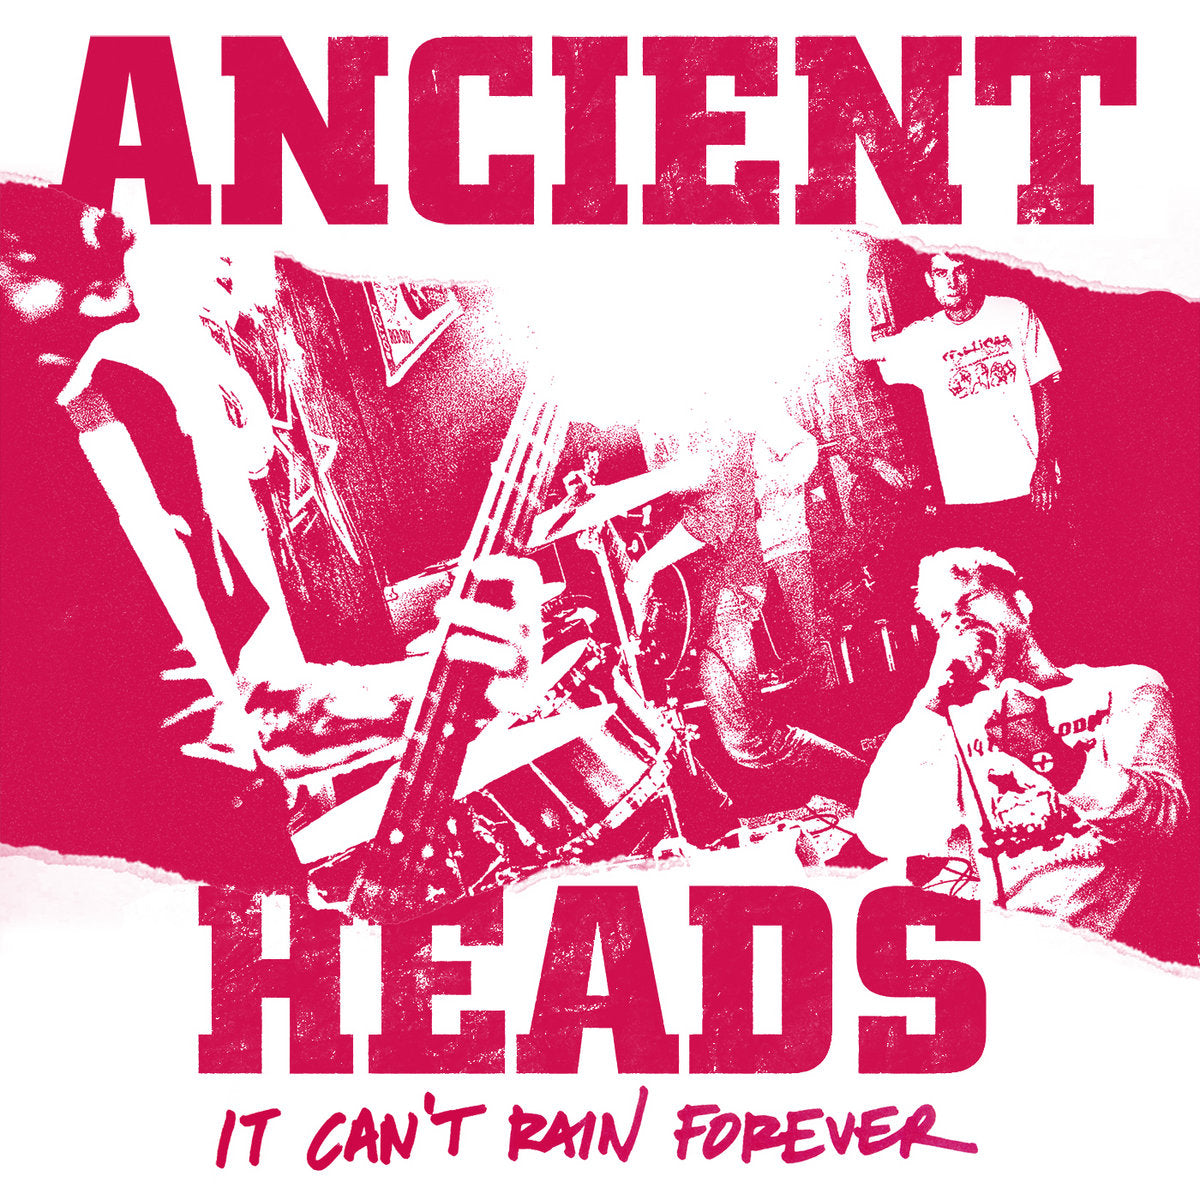 ANCIENT HEADS 'It Can't Rain Forever' 7" / WHITE EDITION